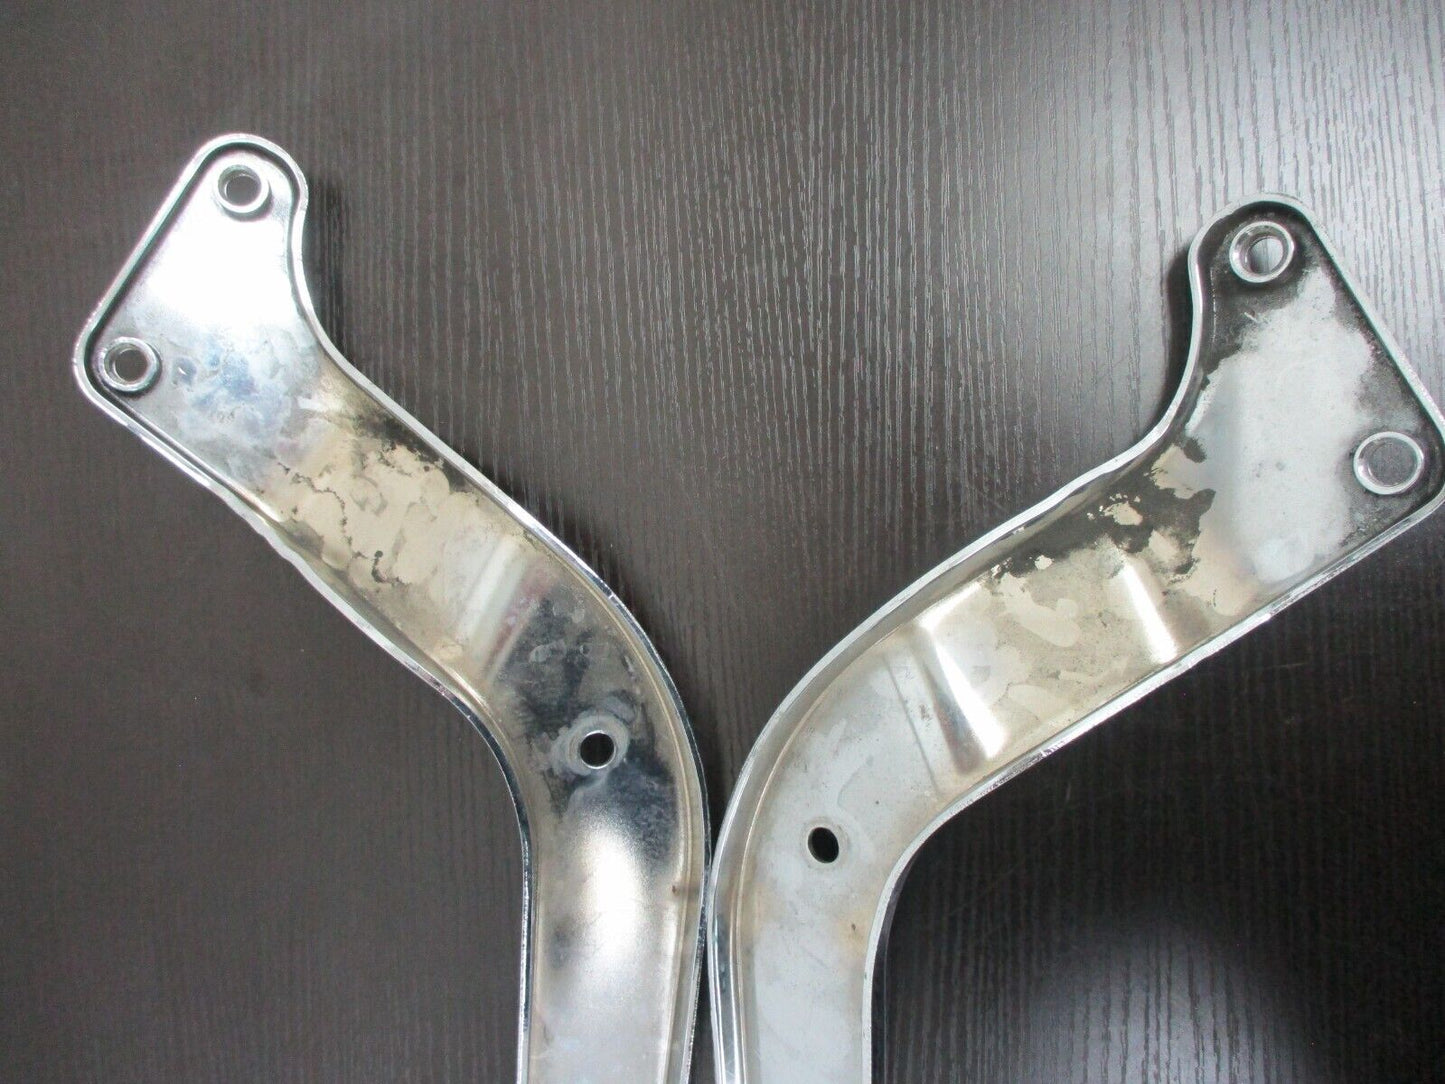 Harley-Davidson OEM Fender Support Pair (Softail) 60143-06A/60146-06A